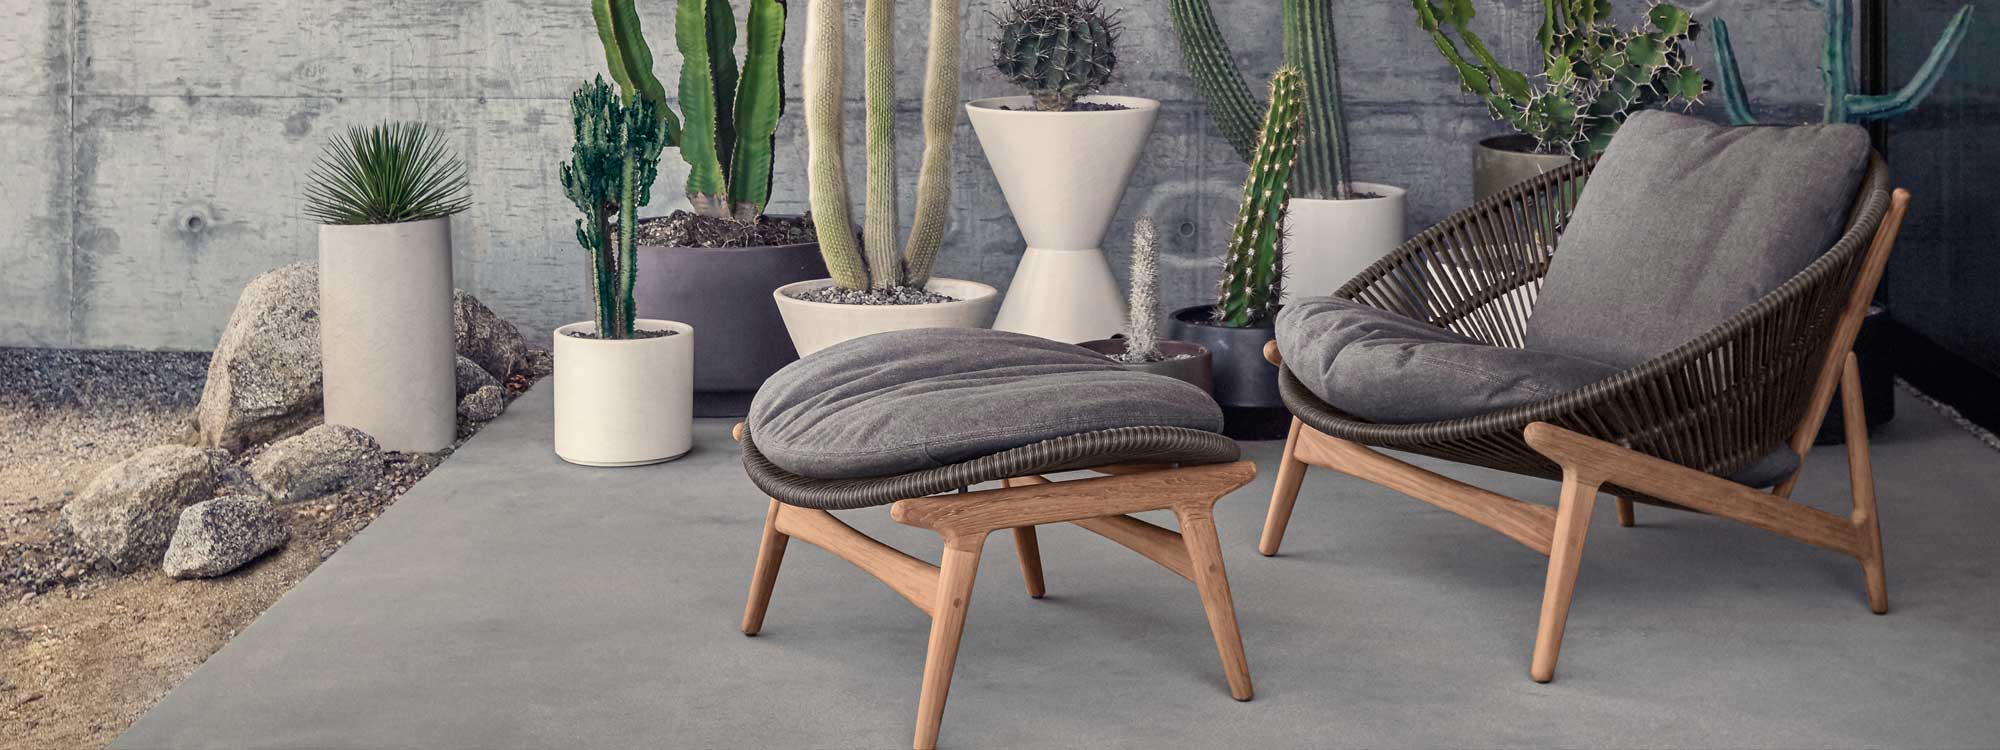 Image of Bora garden lounge chair and foot rest with retro-inspired design by Gloster, with several cactuses in plant pots in the background